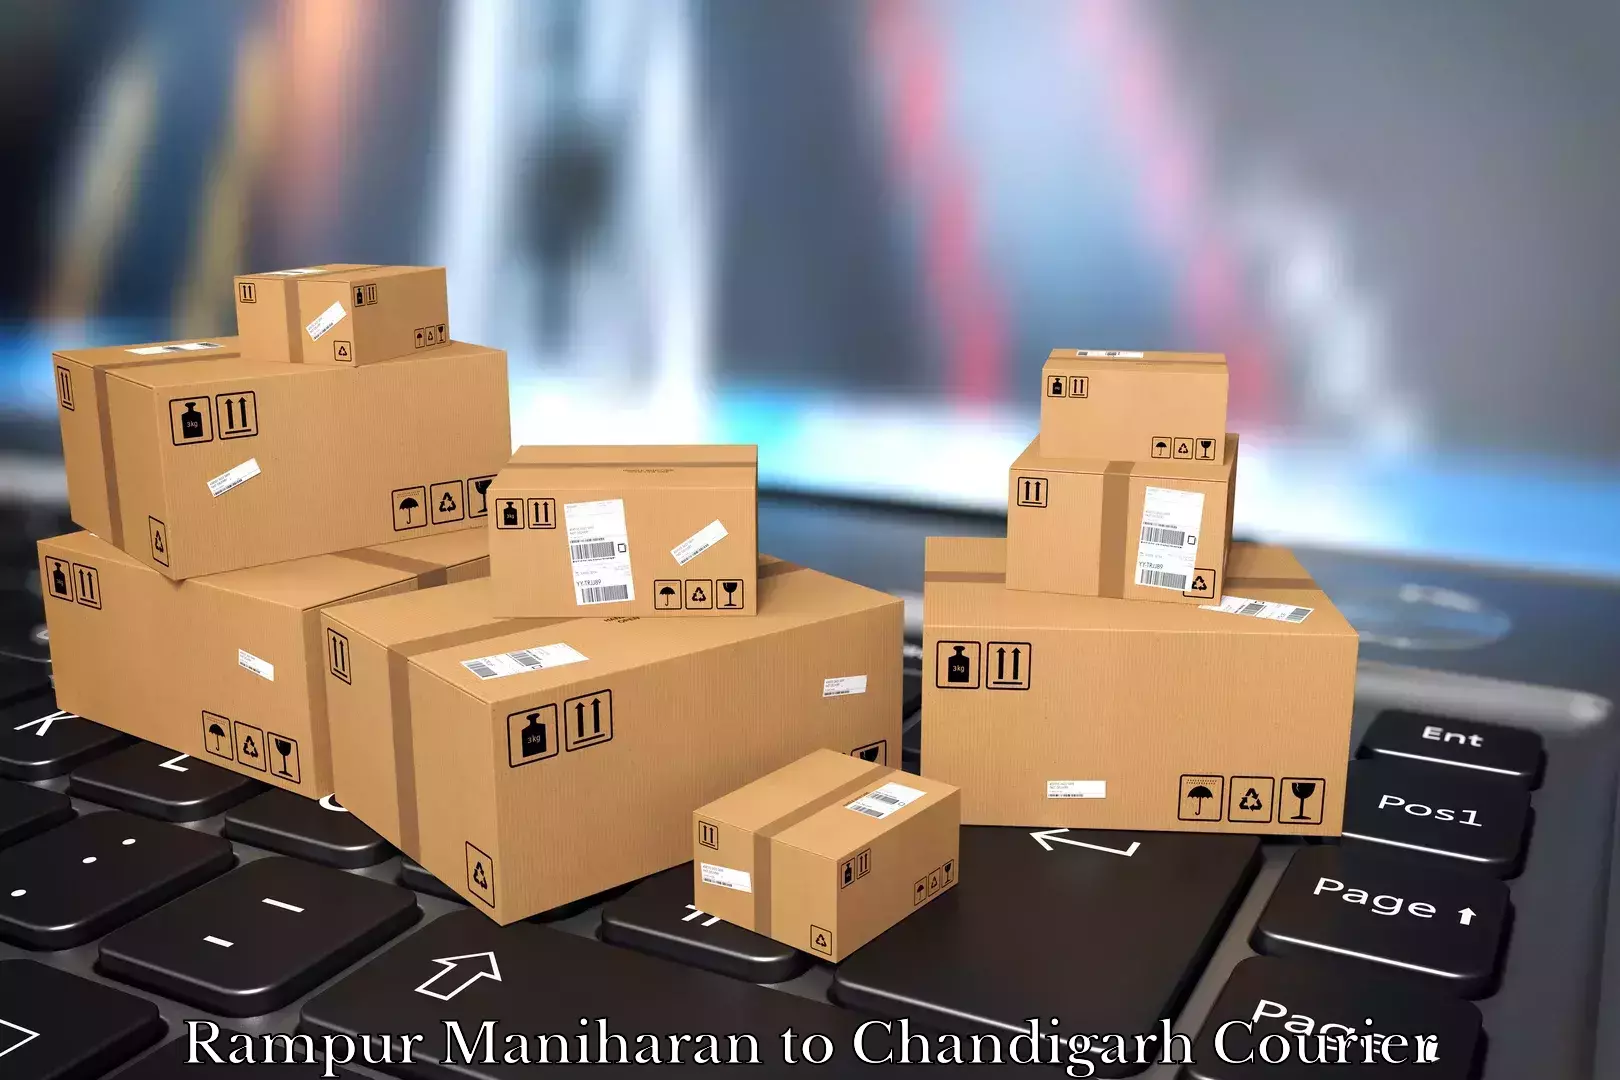 Furniture delivery service Rampur Maniharan to Chandigarh